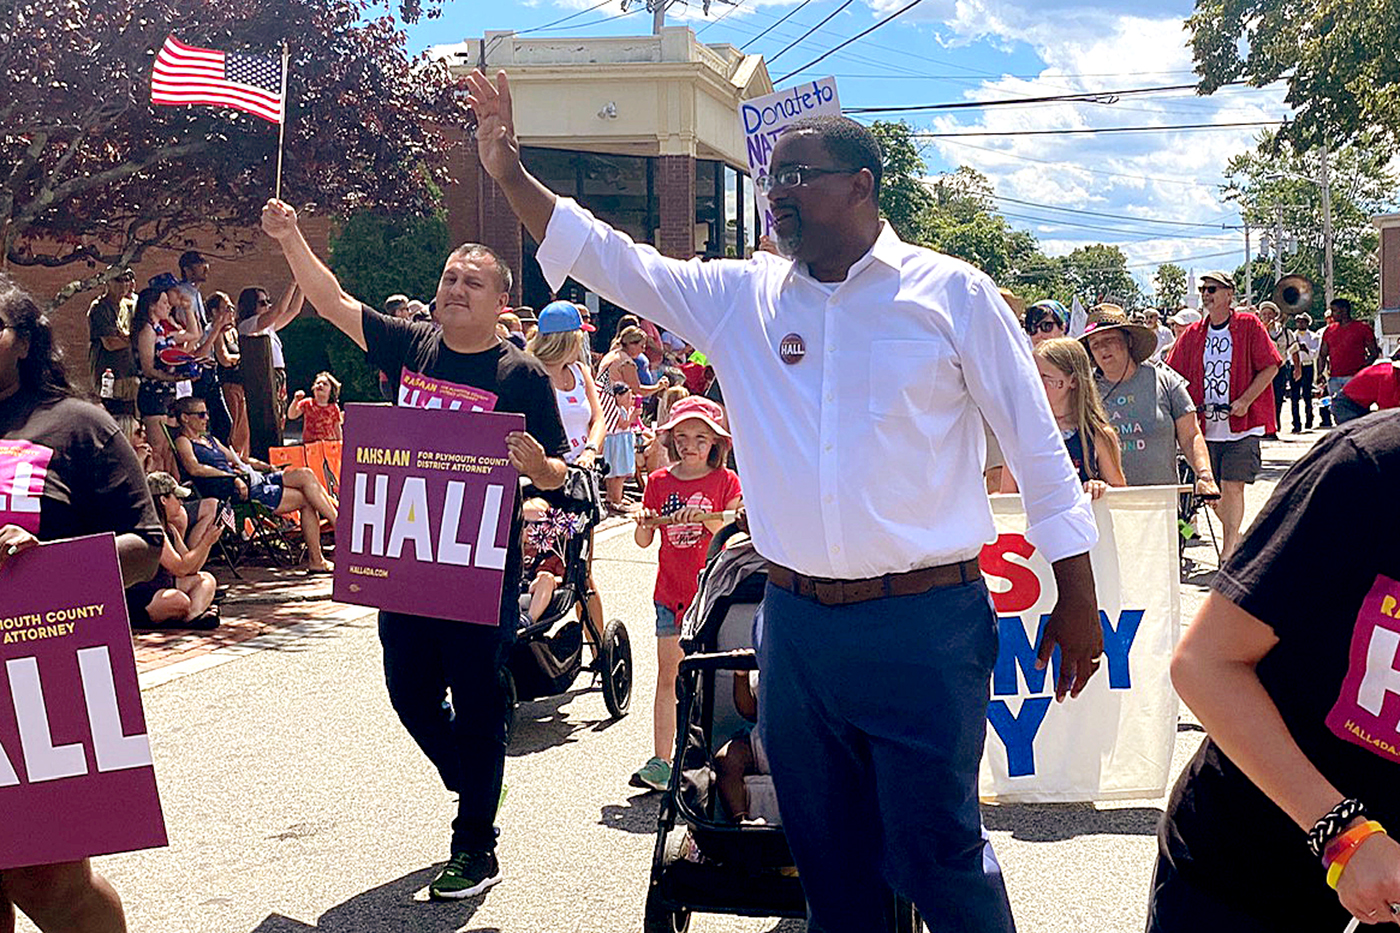 Rahsaan Hall waves to the crowd as he walks in a parade surrounded by supporters carrying signs bearing his name and carrying American flags